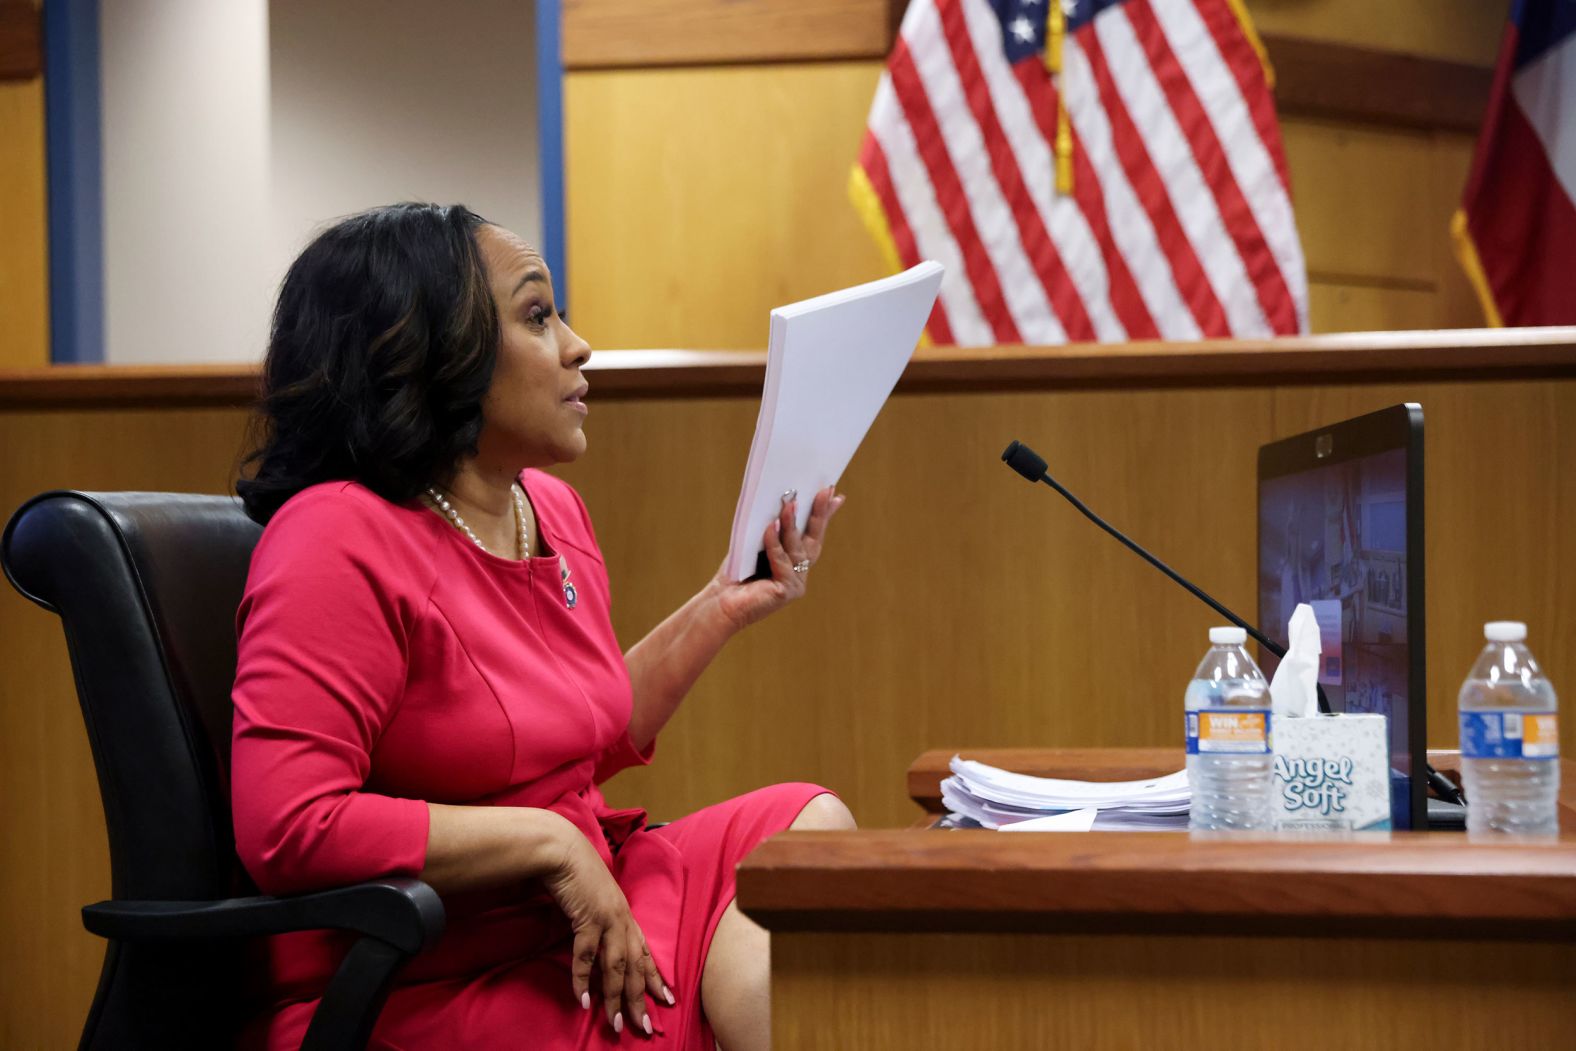 Fulton County District Attorney Fani Willis testifies during a hearing in Atlanta on Thursday, February 15. A judge is considering whether Willis, who brought an election subversion case against former President Donald Trump and 18 other co-defendants, should be disqualified based on allegations that she and Nathan Wade, the special prosecutor she hired to lead the case, engaged in an improper romantic relationship that financially benefited her. Wade and Willis have acknowledged that they had a personal relationship but deny any wrongdoing.